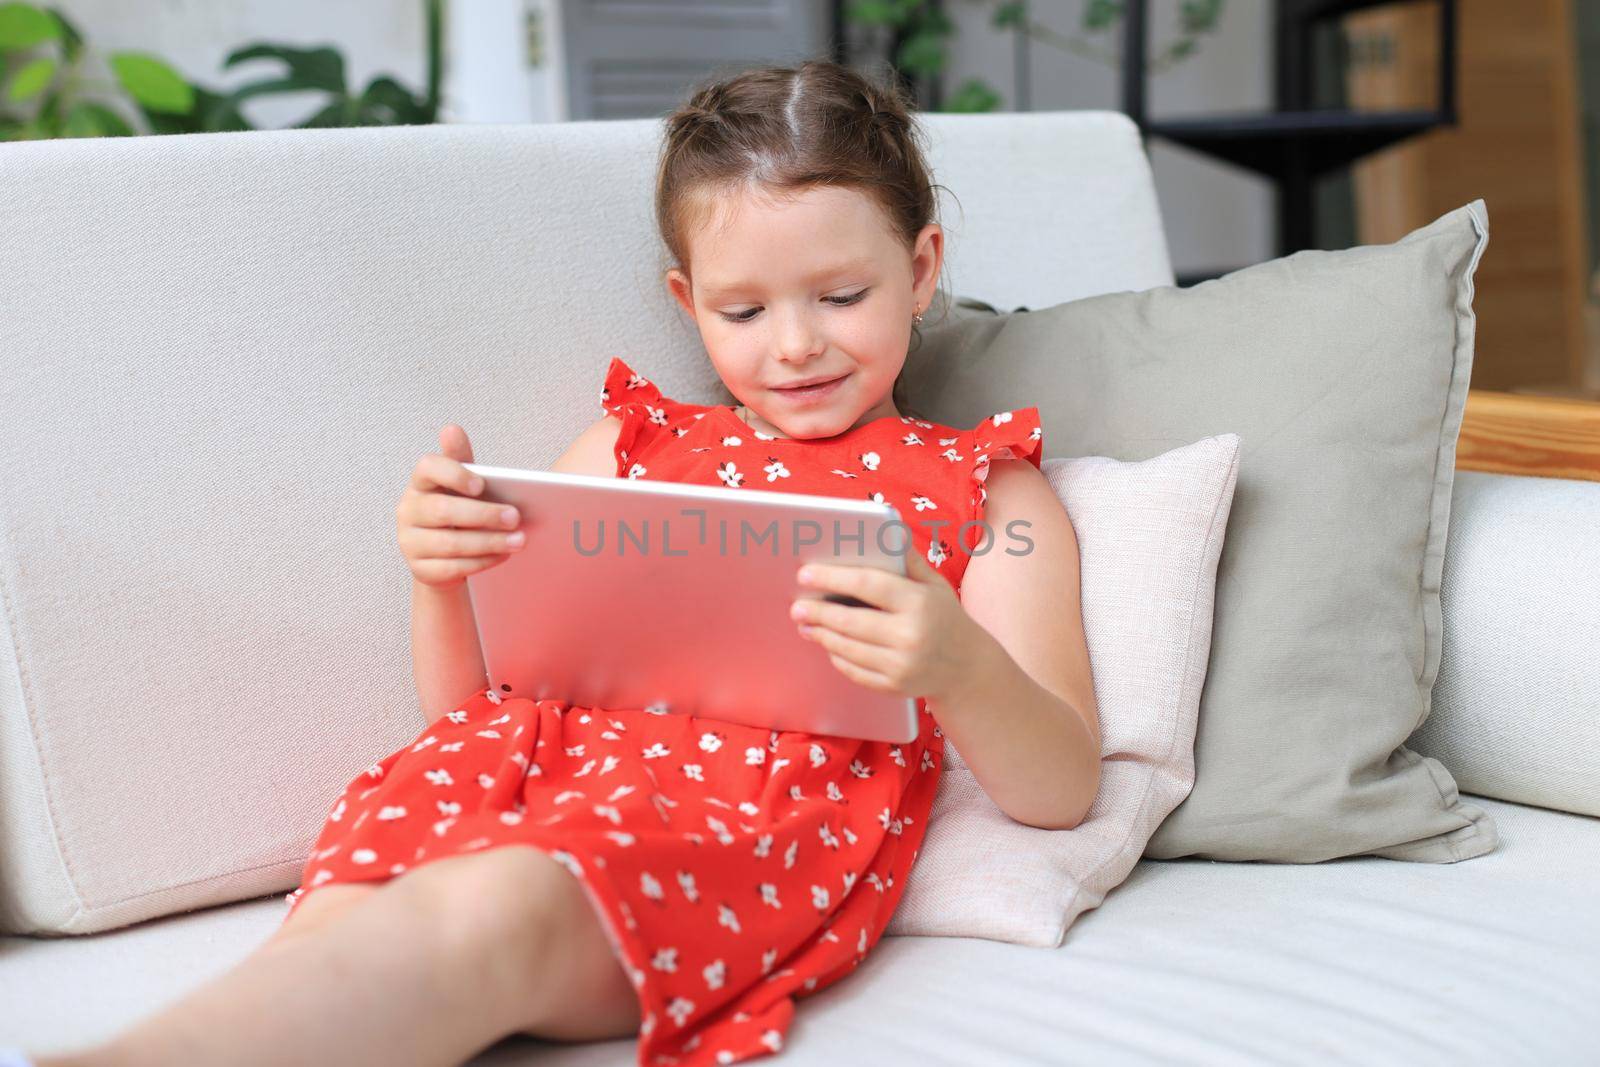 Smiling little girl lying on sofa playing online games, web surfing information, using funny applications on tablet